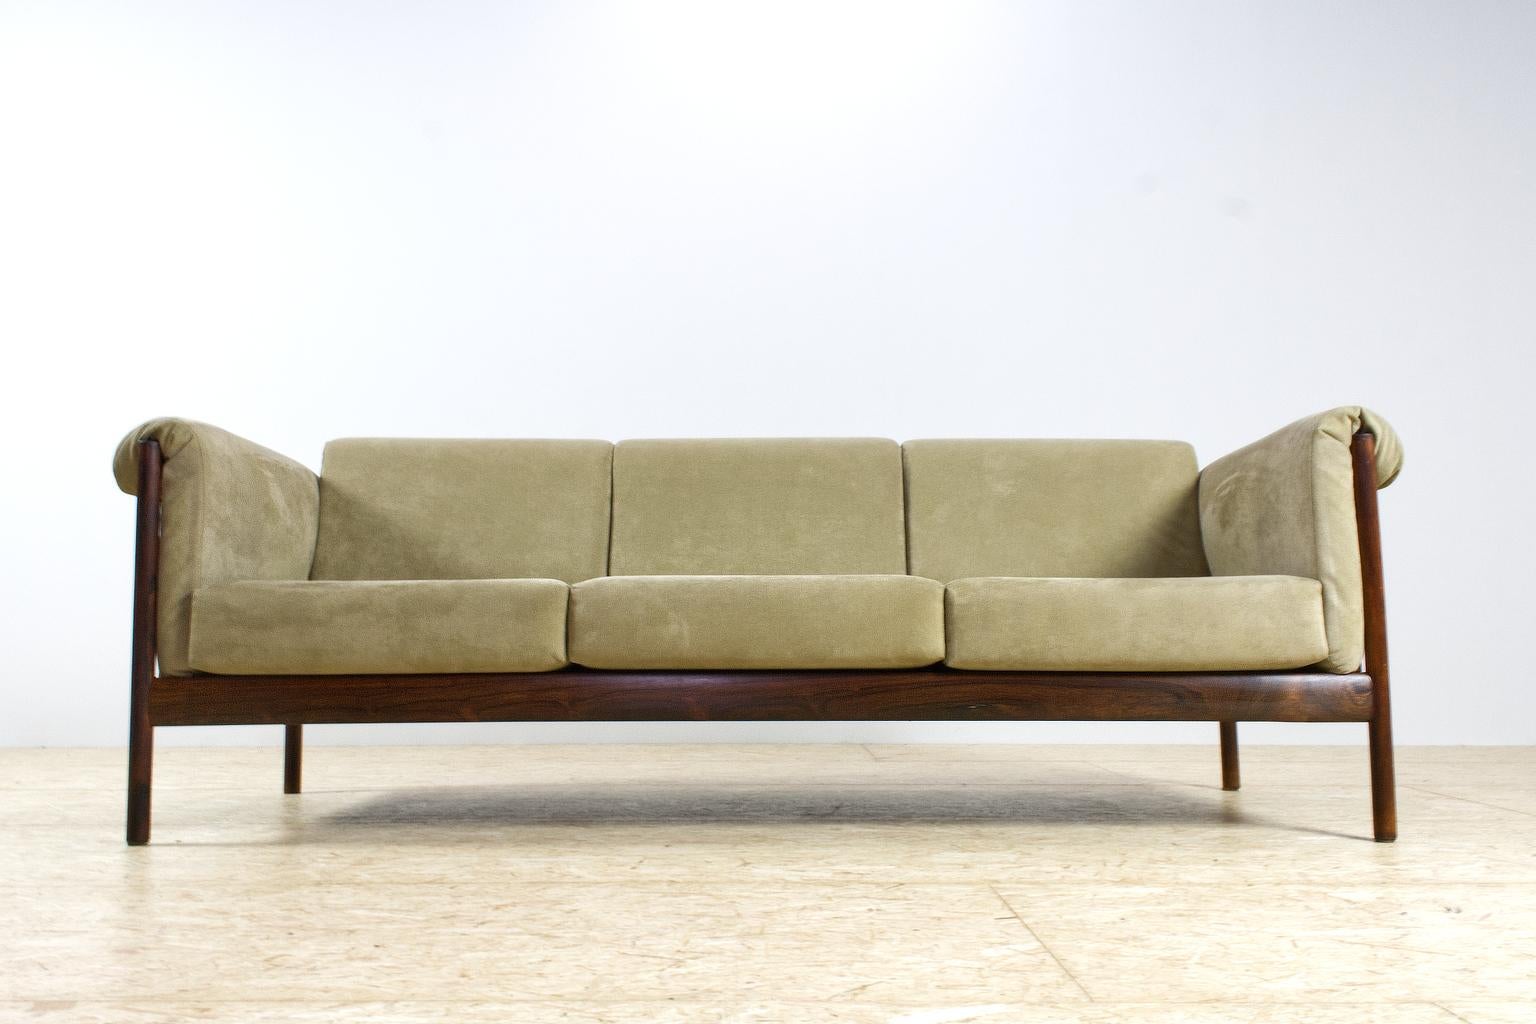 An elegant and refined piece of Scandinavian Modern design, robust yet elegant, a rectangular sofa with an eye catching slat back and a great quality light brown alcantara furniture fabric. This large 3 seater sofa is executed in solid rosewood,